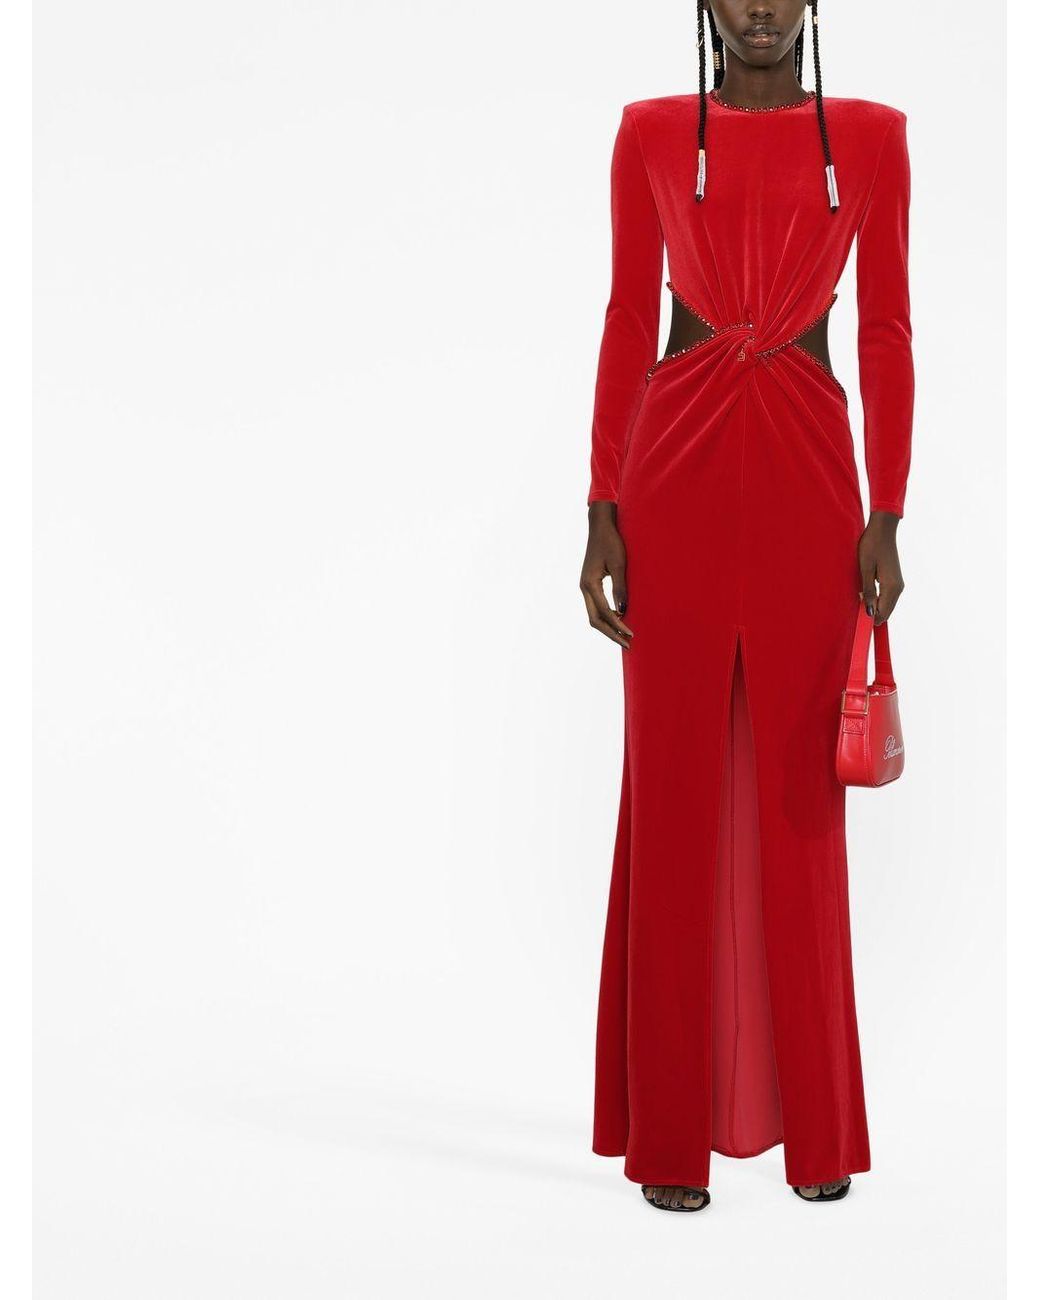 Elisabetta Franchi Velvet Cut-out Gown in Red | Lyst